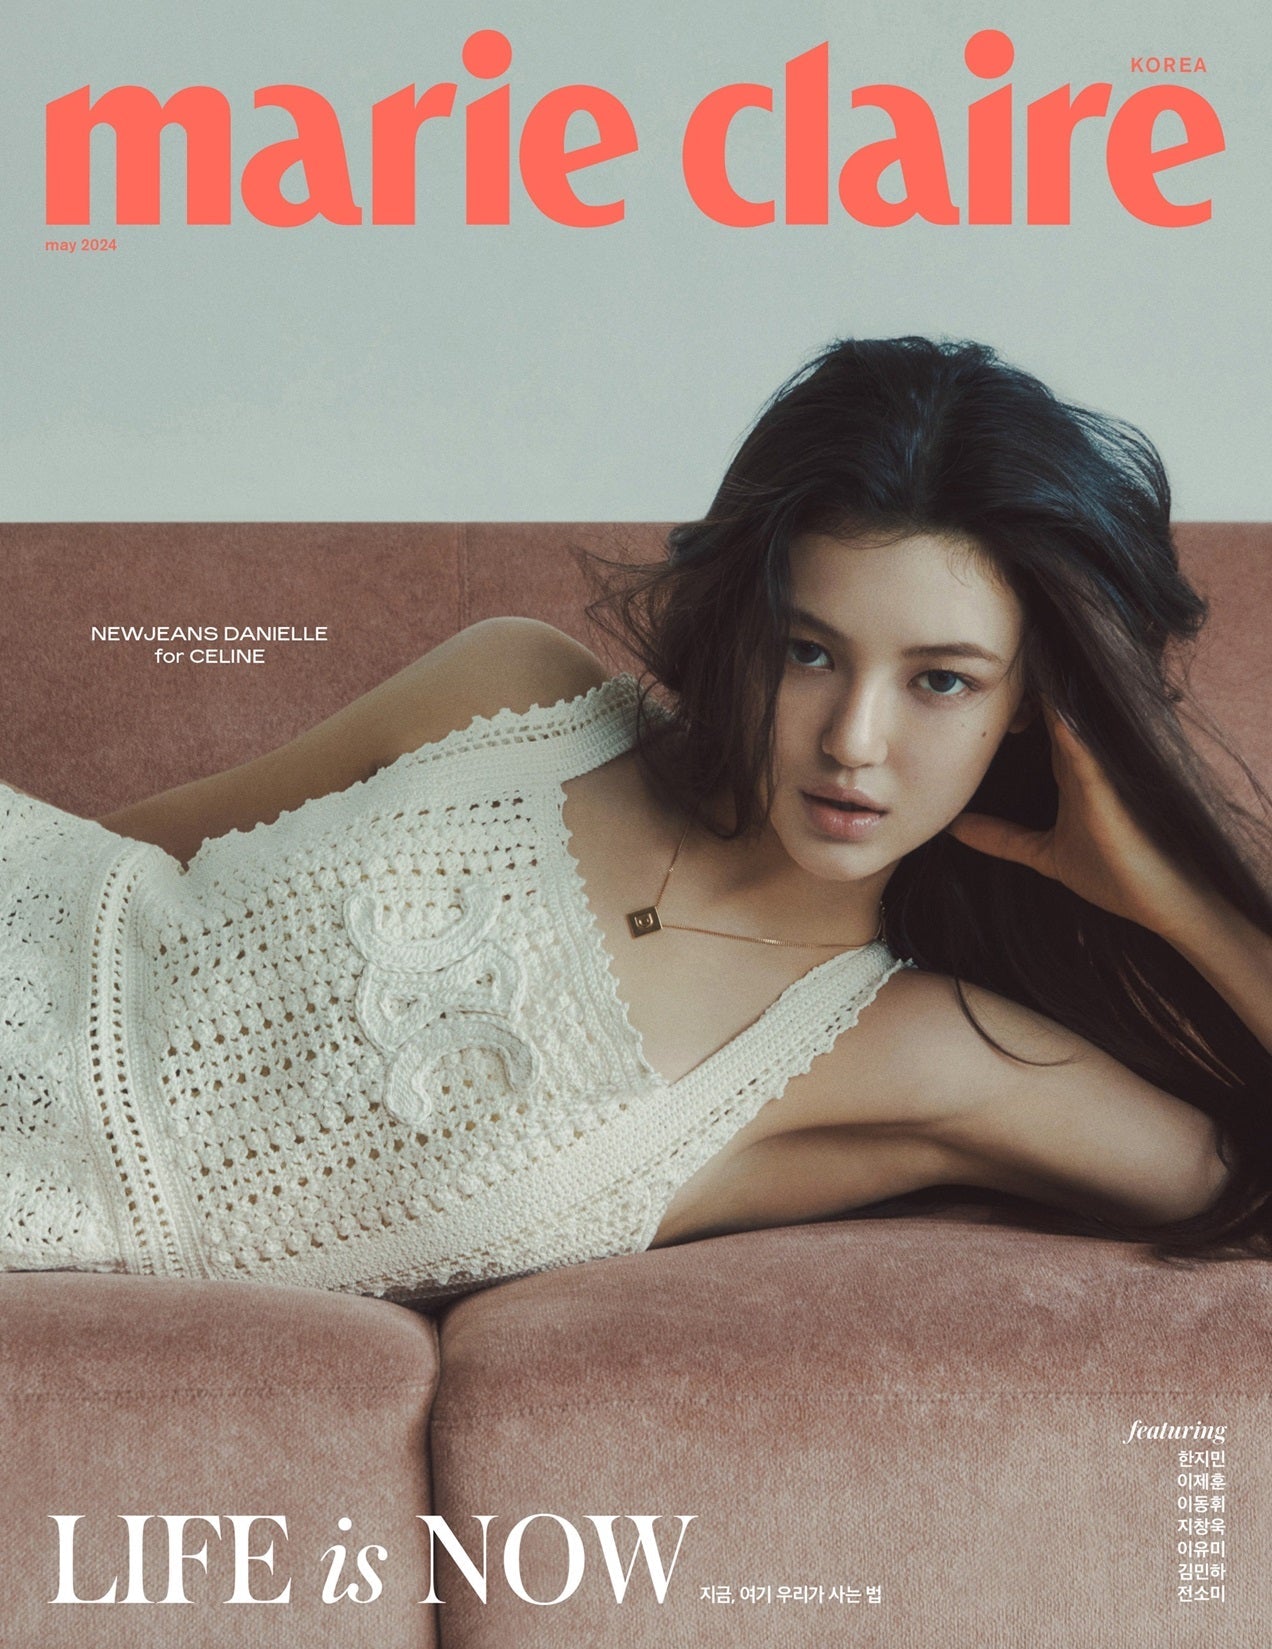 marie claire - [2024, May] - Cover : NEWJEANS DANIELLE COVER A Magazine - Seoulfy